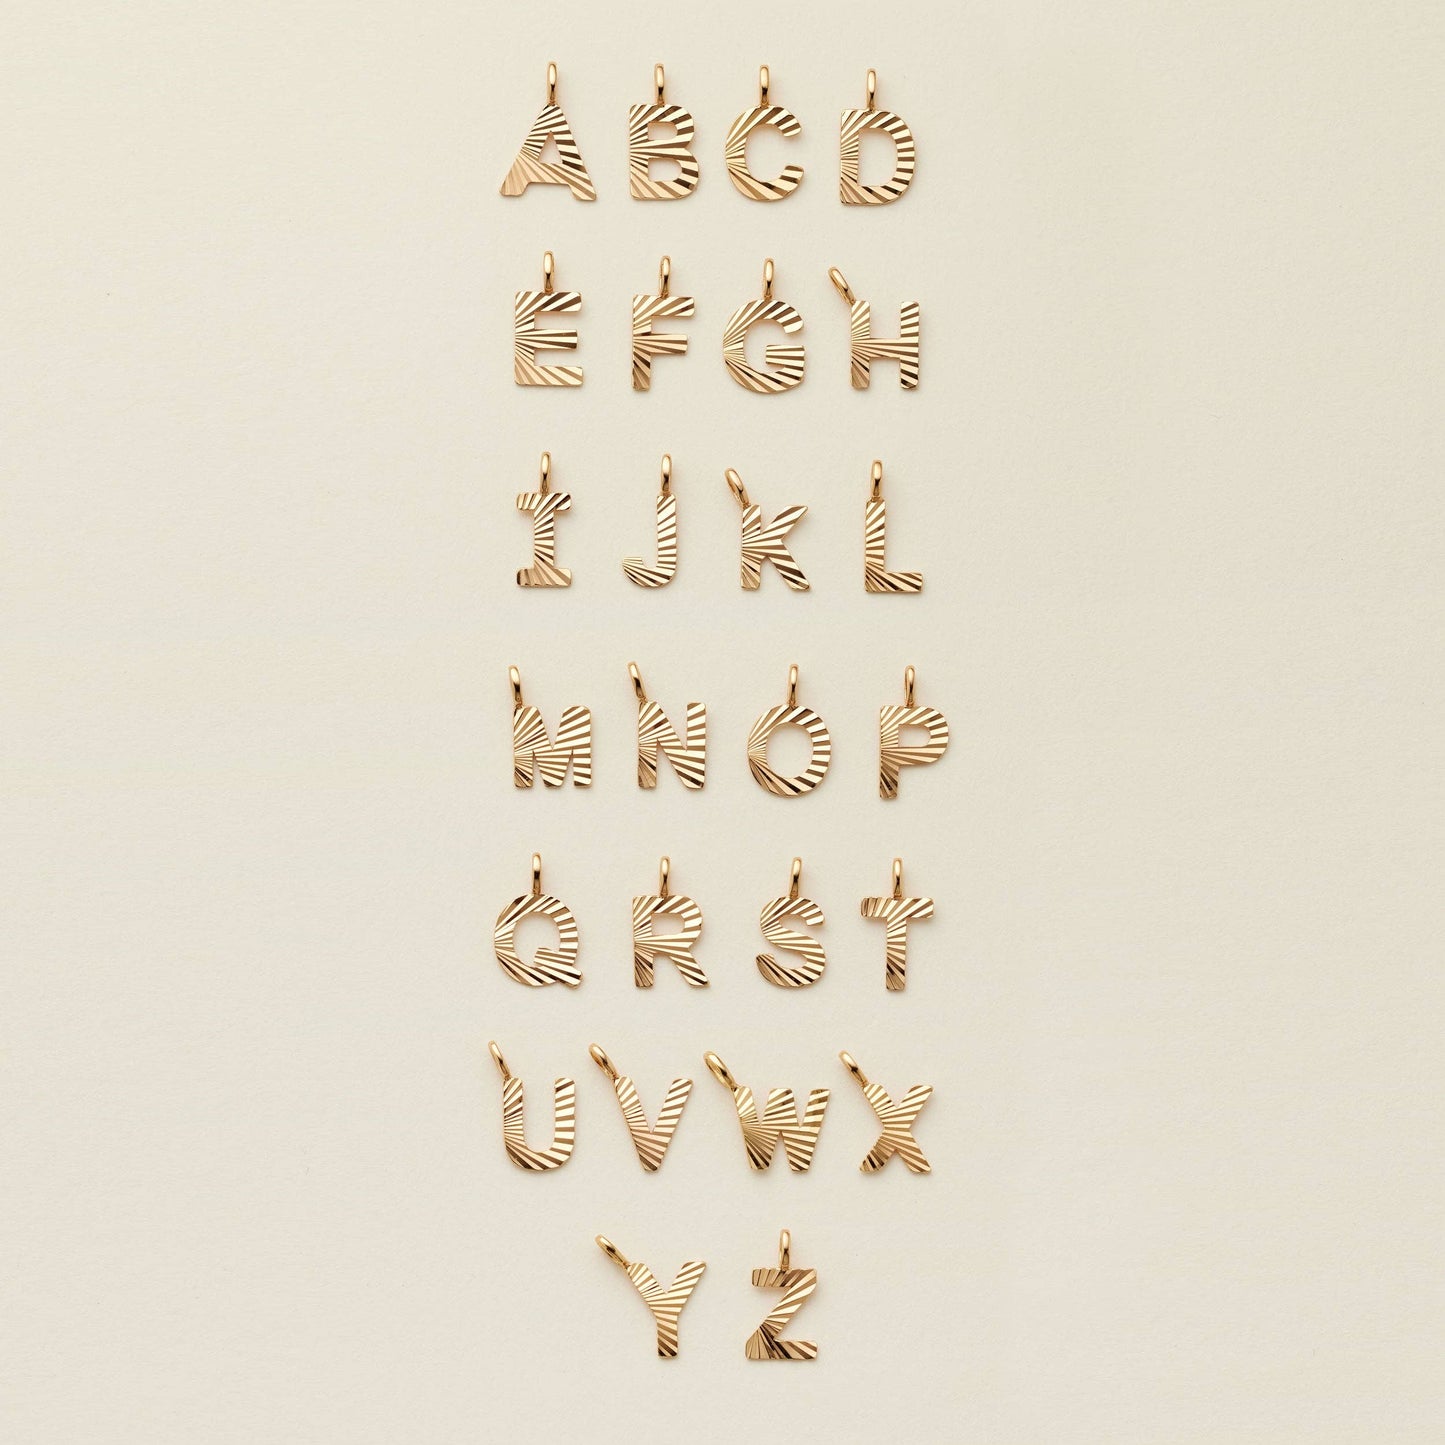 textured gold initial charms displayed in alphabetical order a through z on a beige background